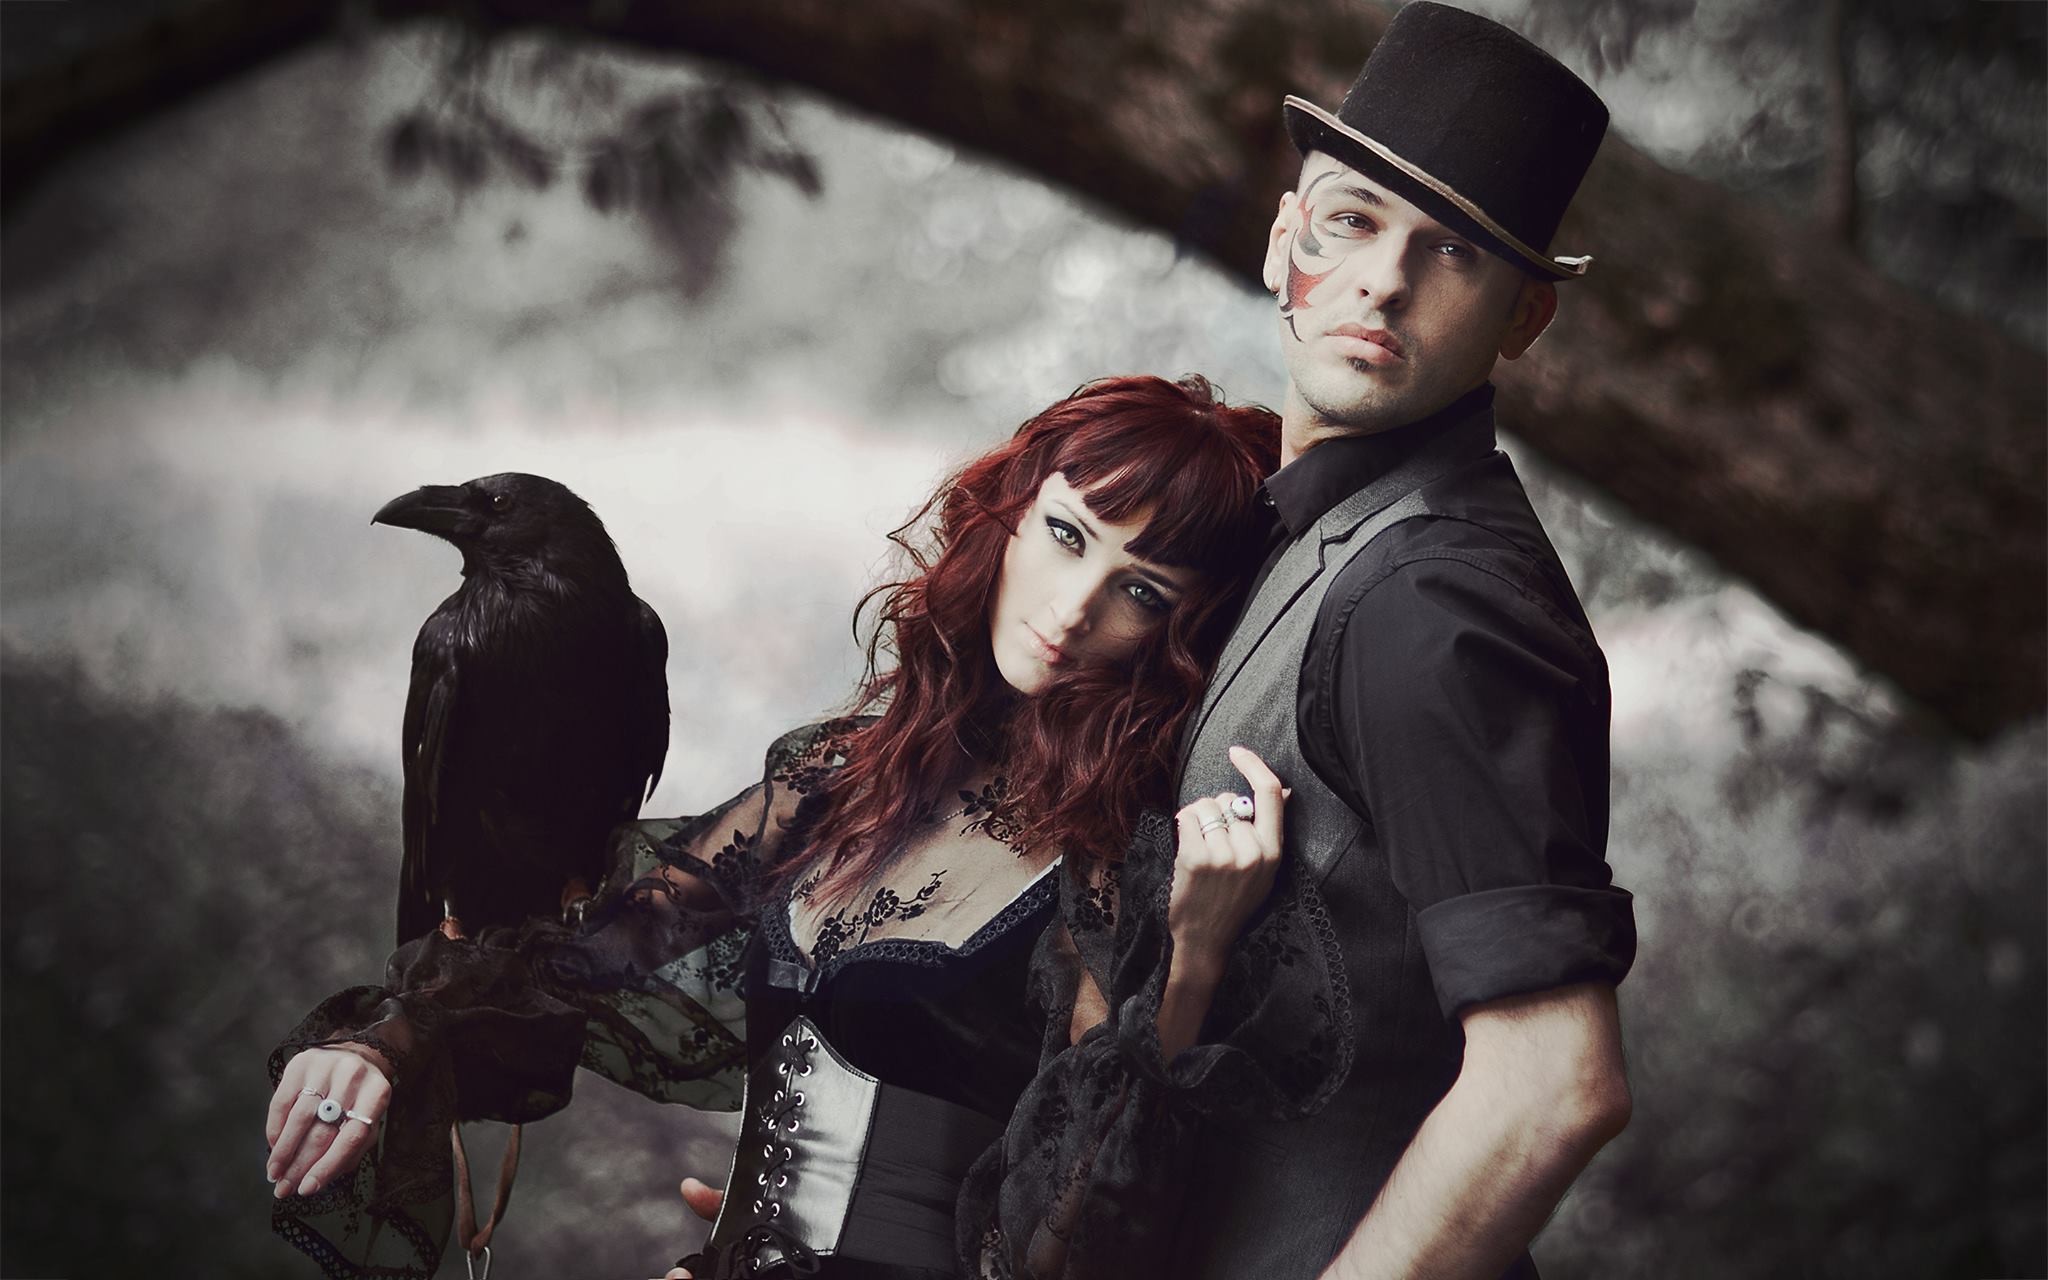 2048x1280 Gothic bonnie and clyde by EmoXDancer Gothic bonnie and clyde by EmoXDancer